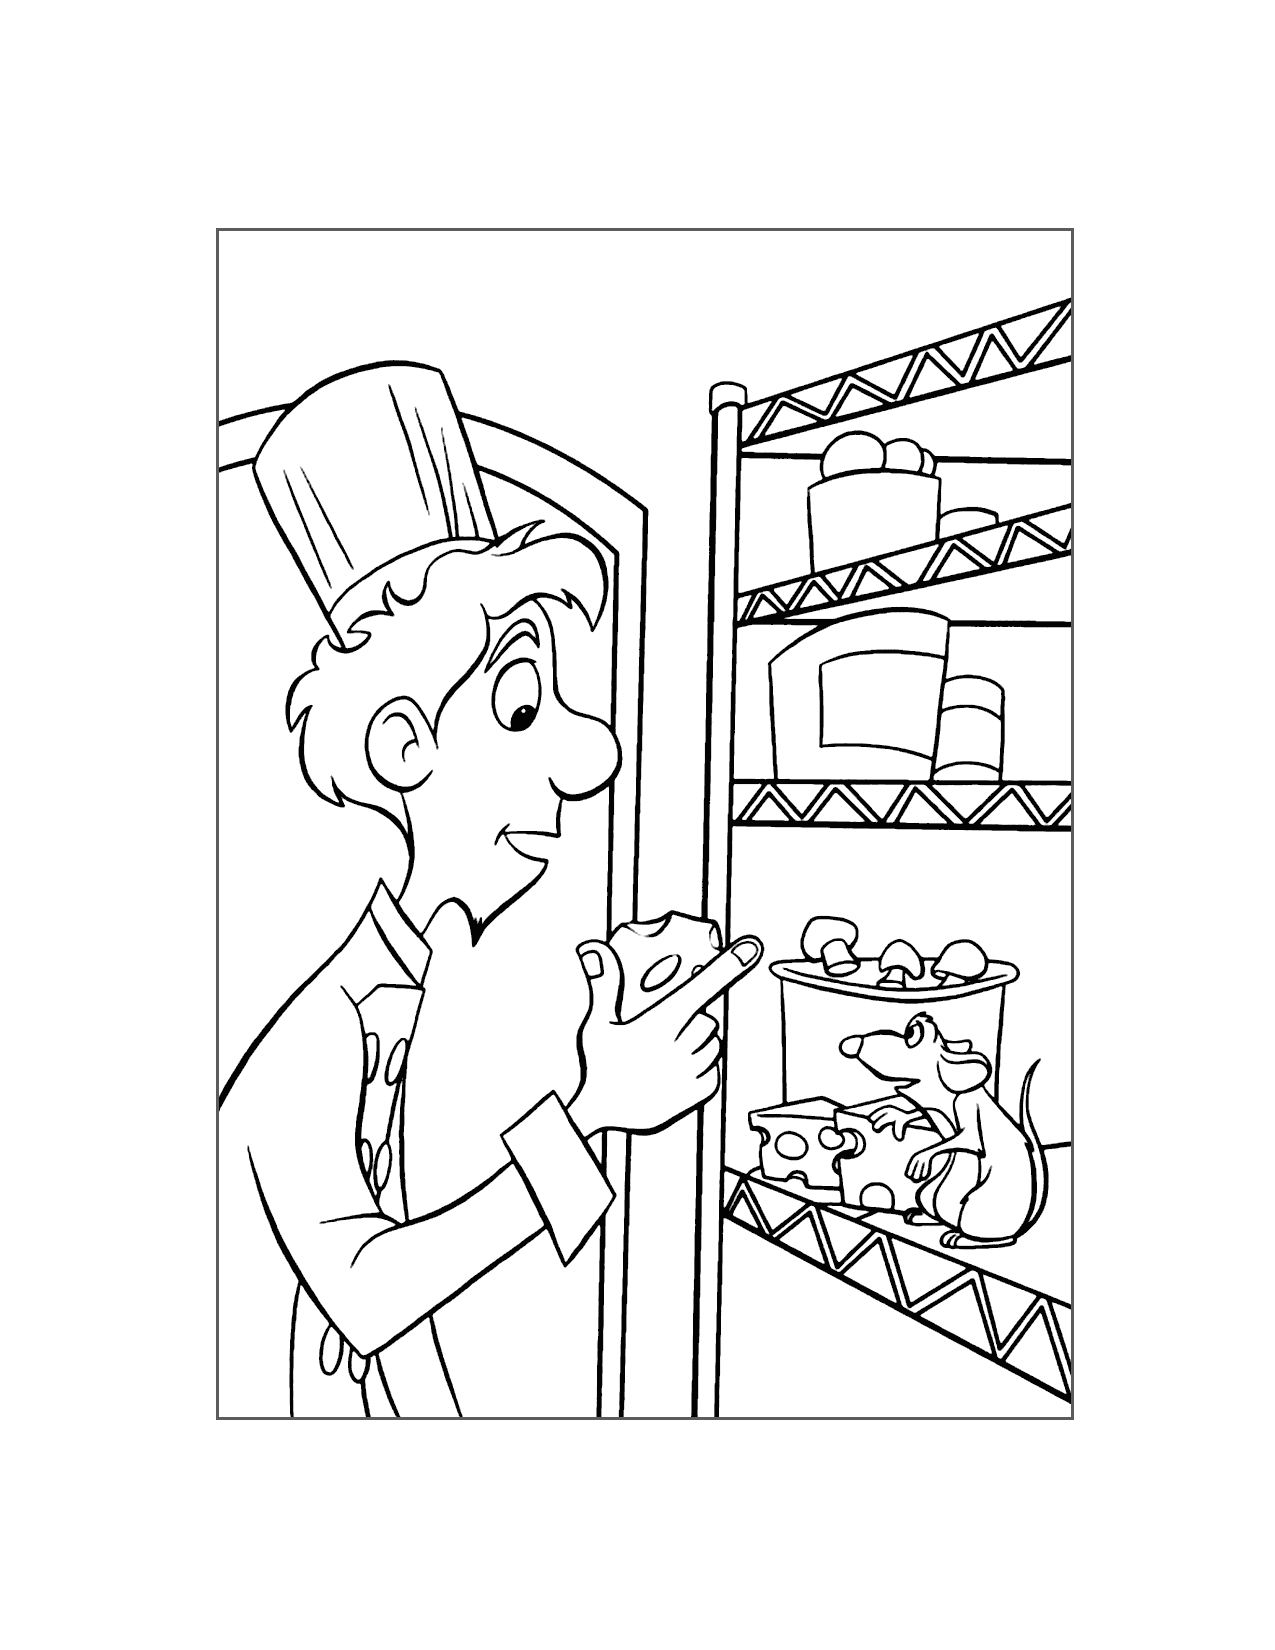 Linguini Gives Hungry Remy Cheese Ratatouille Coloring Page